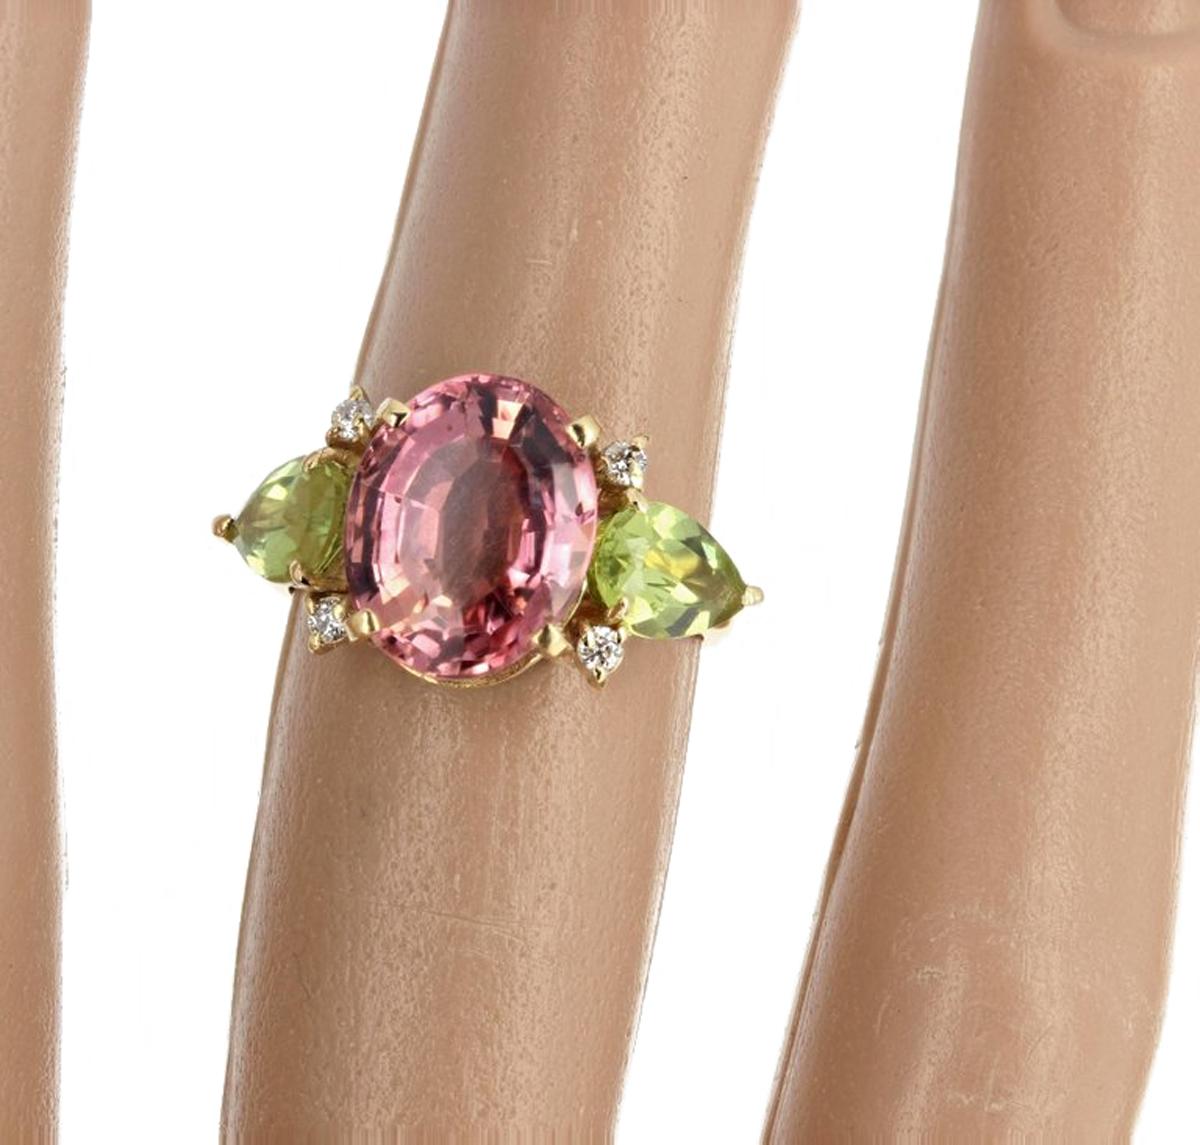 This 5 Carat brilliant Apricot Tourmaline (11.5 mm x 9.3 mm) enhanced with brilliant green pear cut Peridots and .04Ct of diamonds is set in a unique handmade 18 Kt yellow gold ring size 5 (sizable). (There are no eye visible inclusions).  This